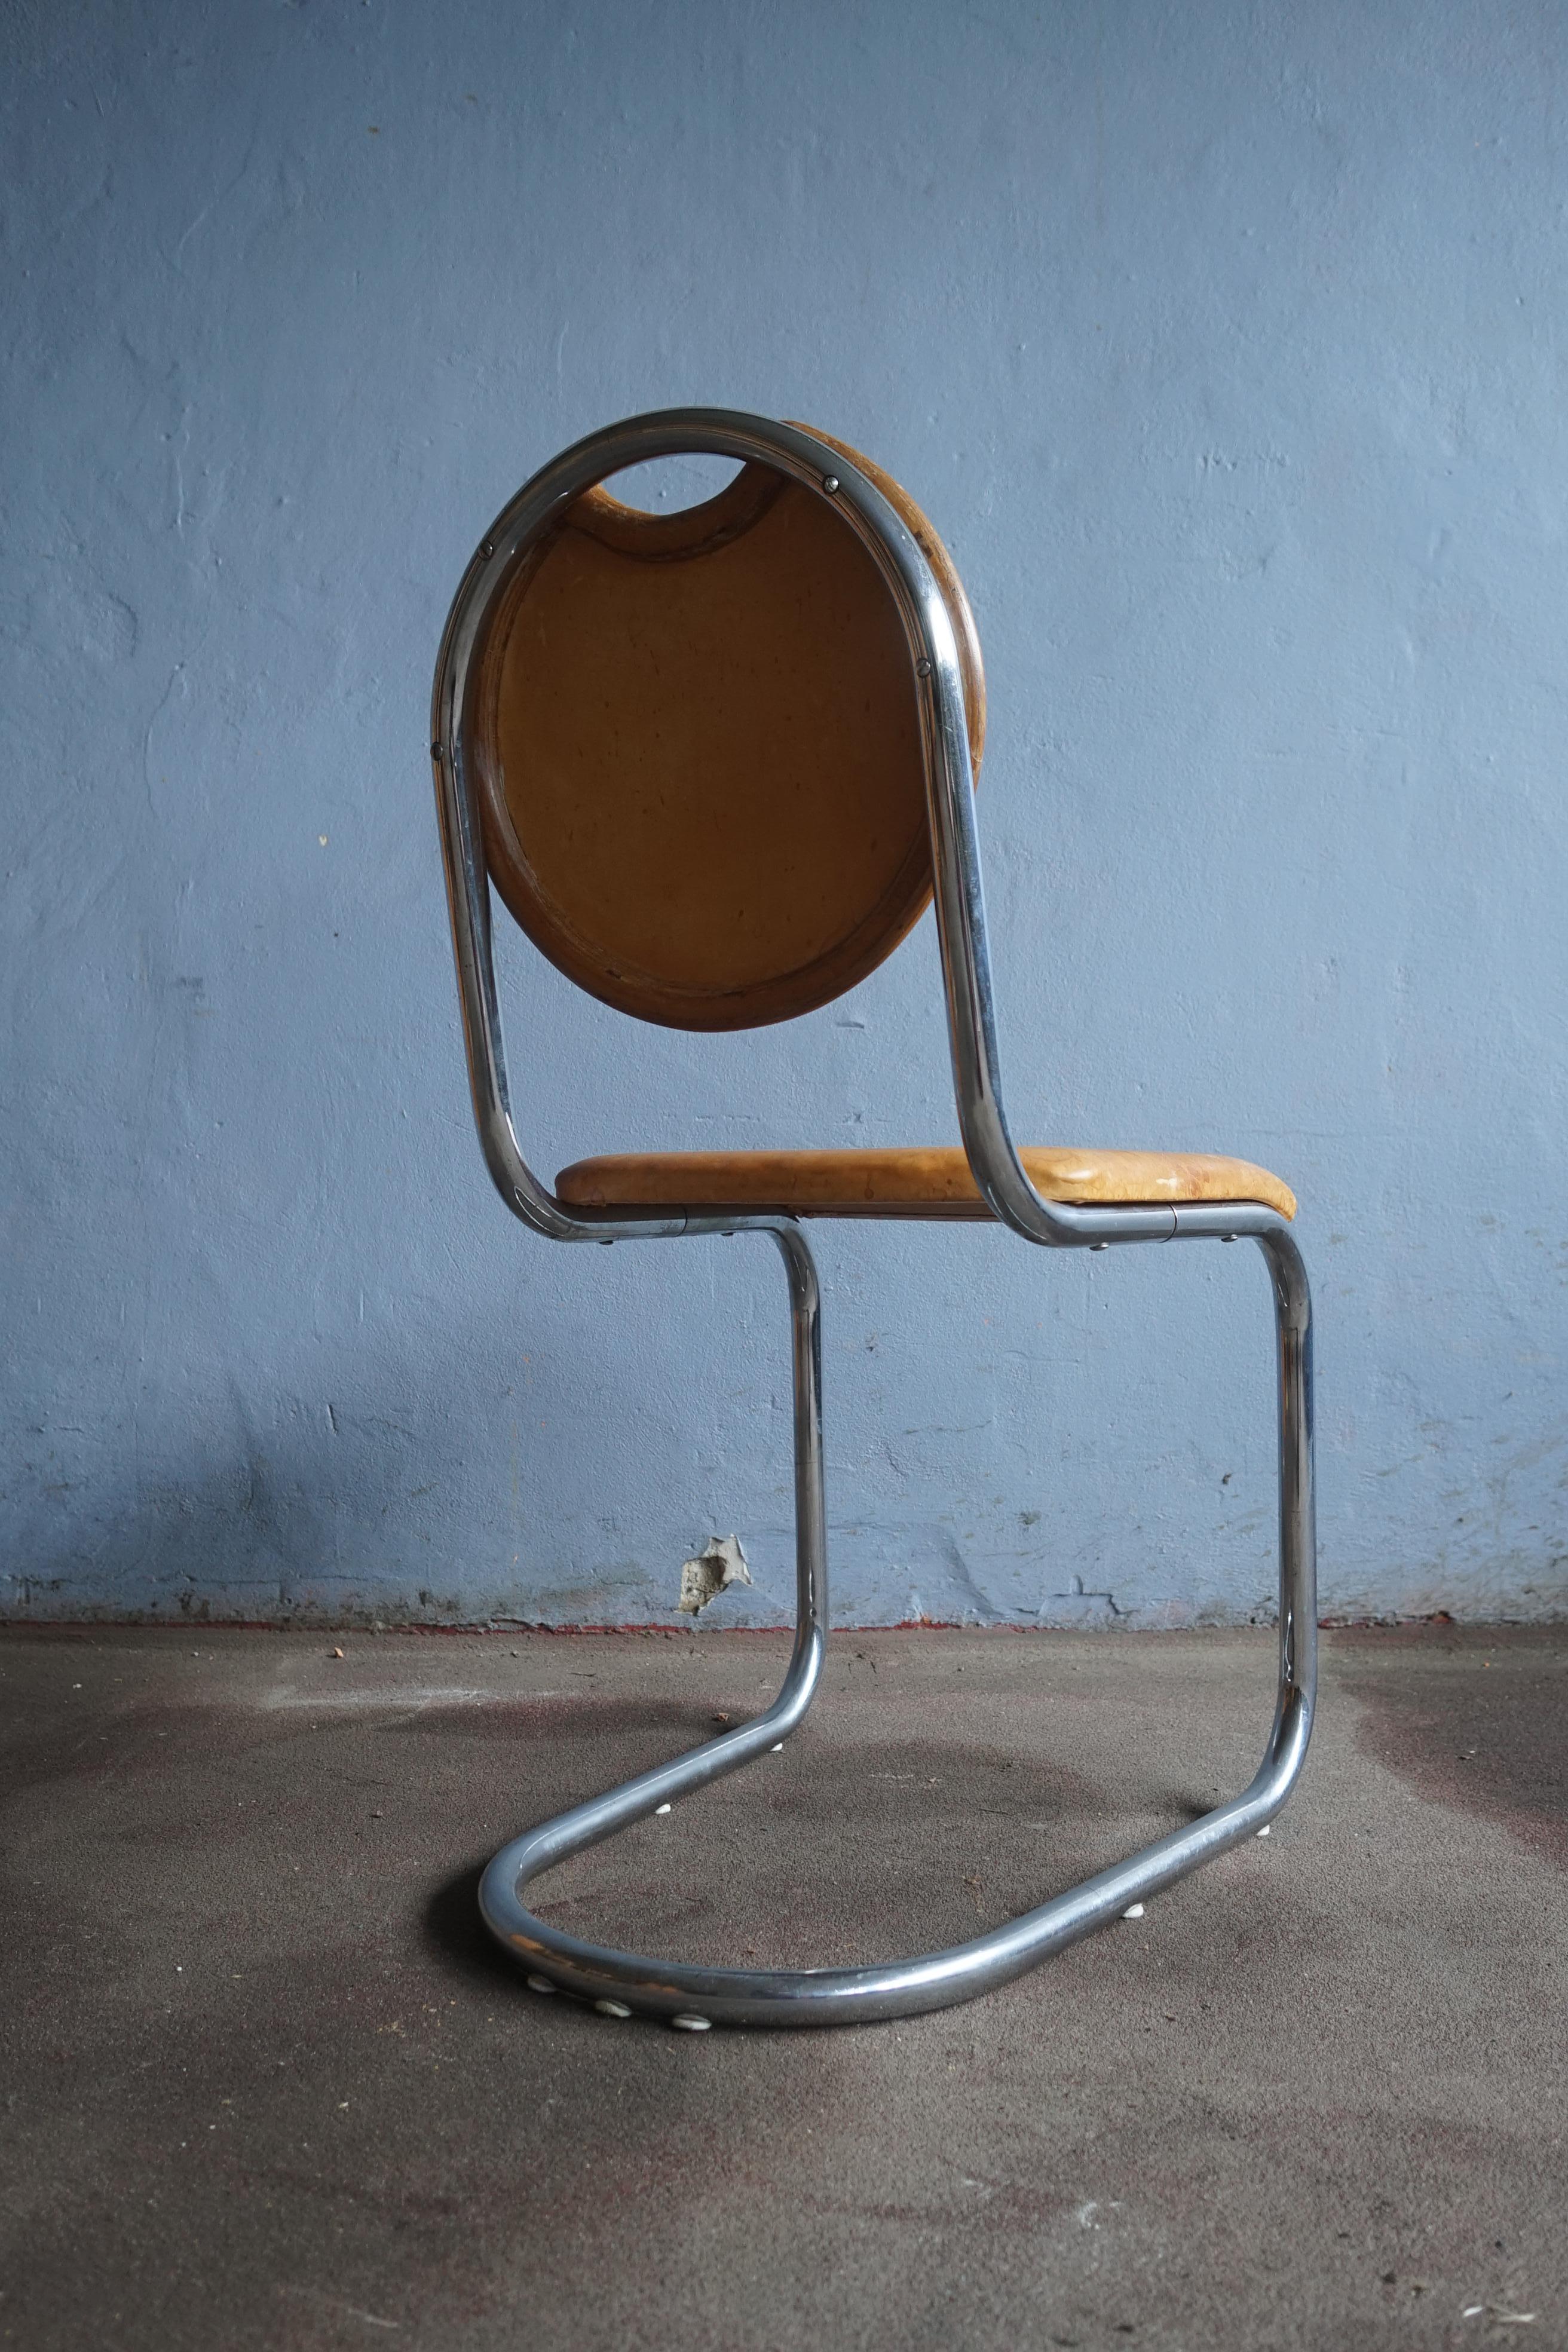 Mid-20th Century Steel Tube Chair Designed by Sven Markelius for Ds Staal Sweden, 1930s For Sale